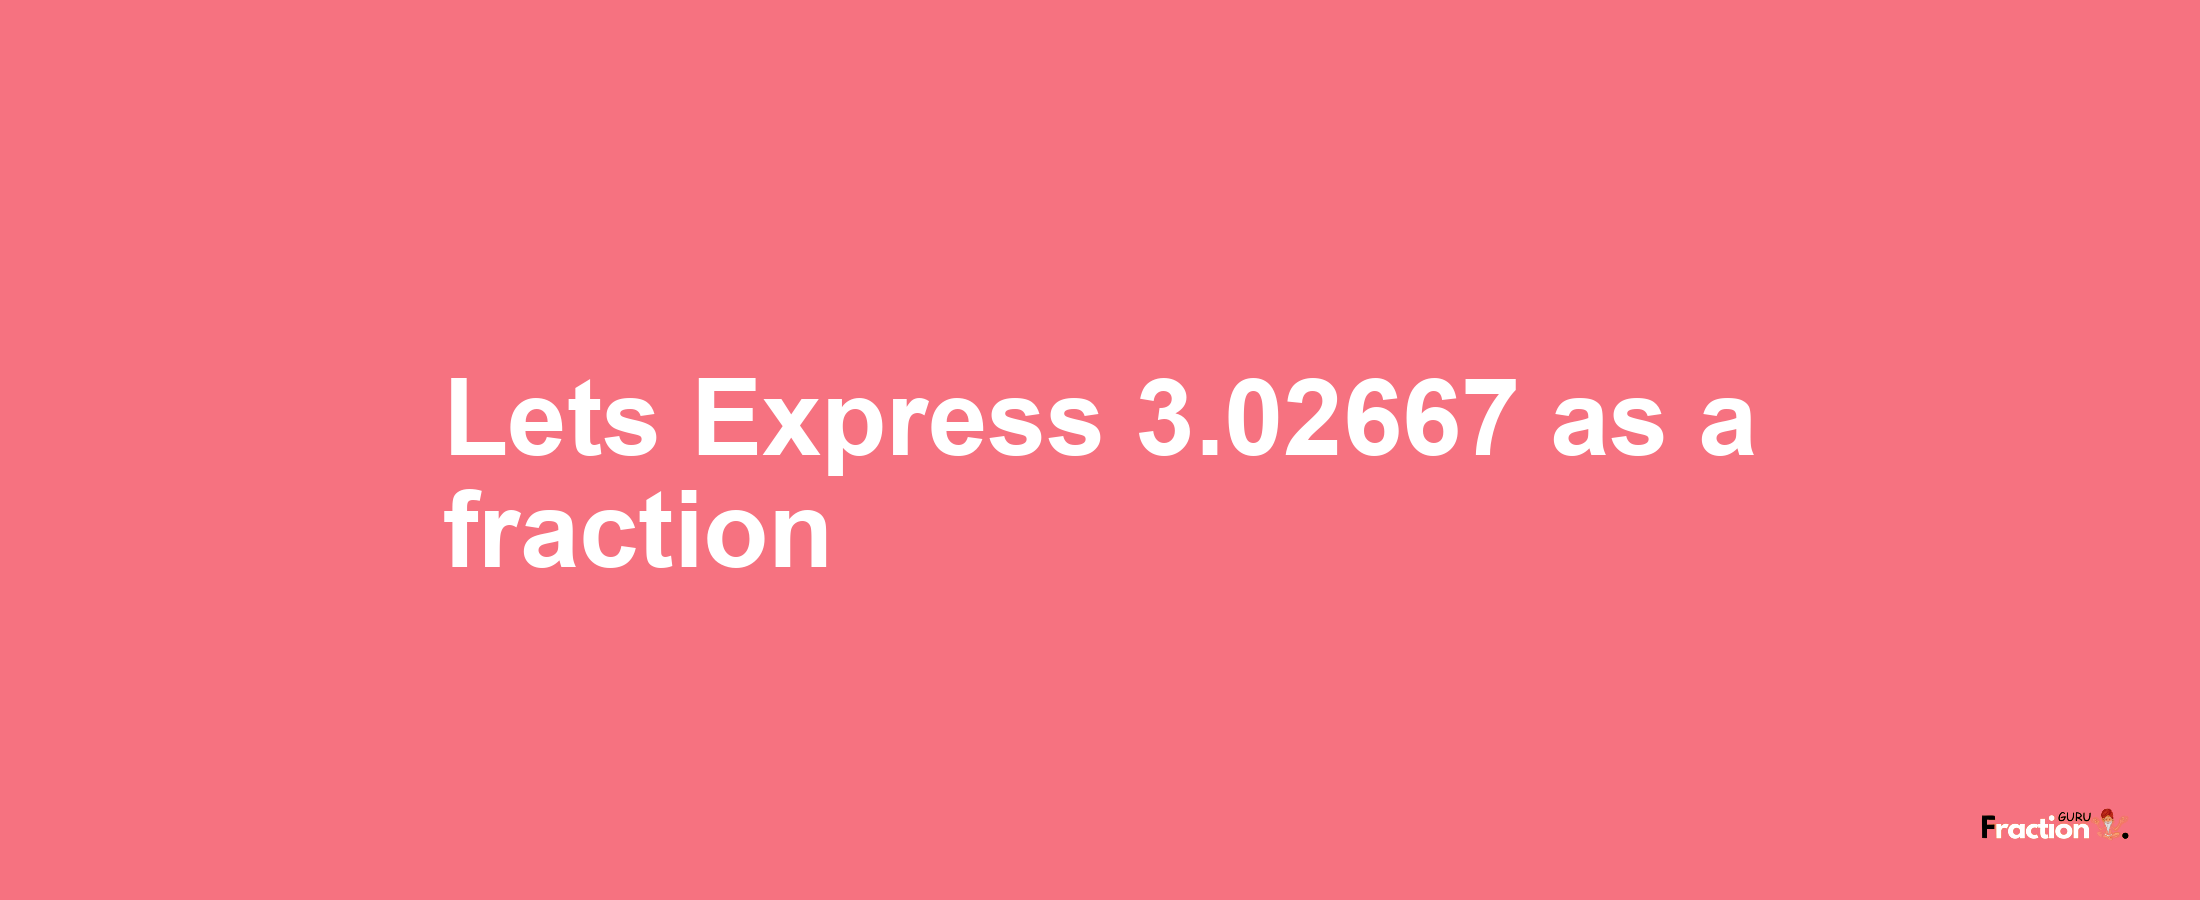 Lets Express 3.02667 as afraction